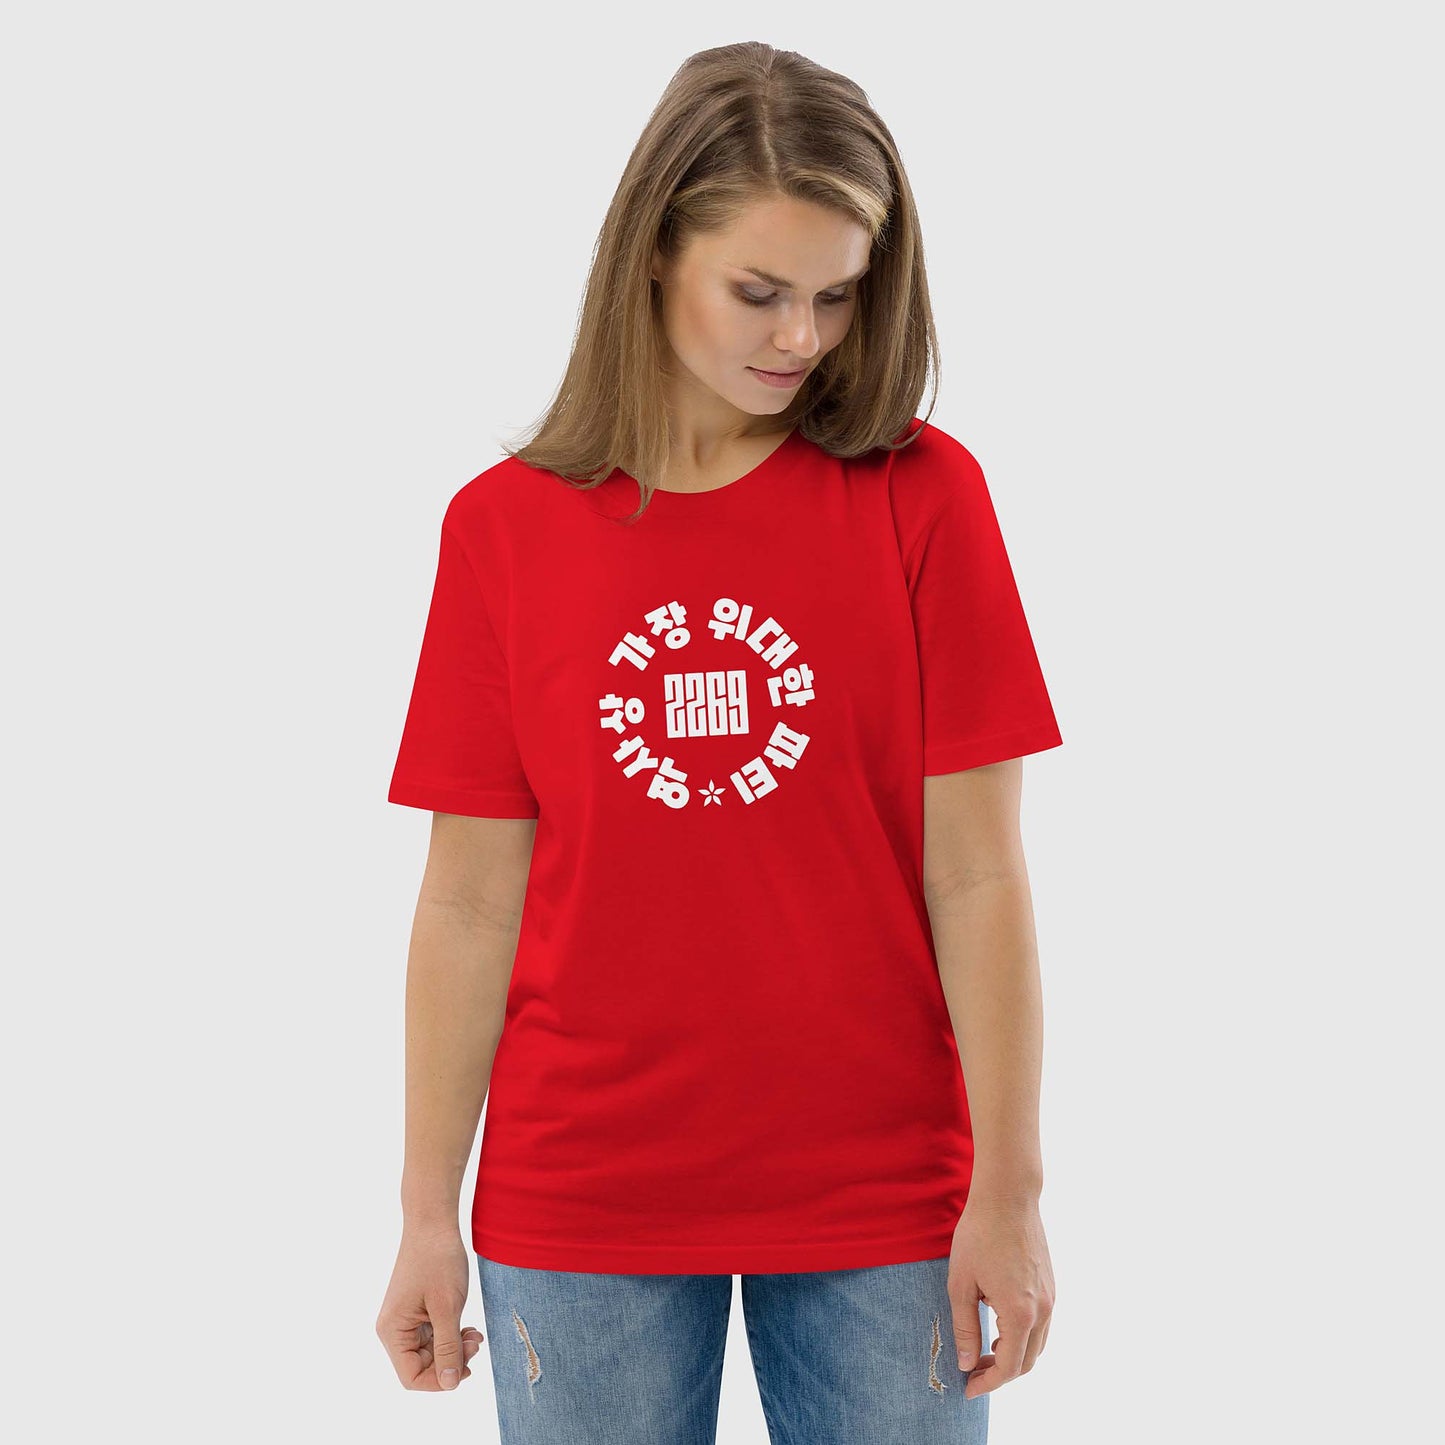 Unisex red organic cotton t-shirt with Korean 2269 party circle